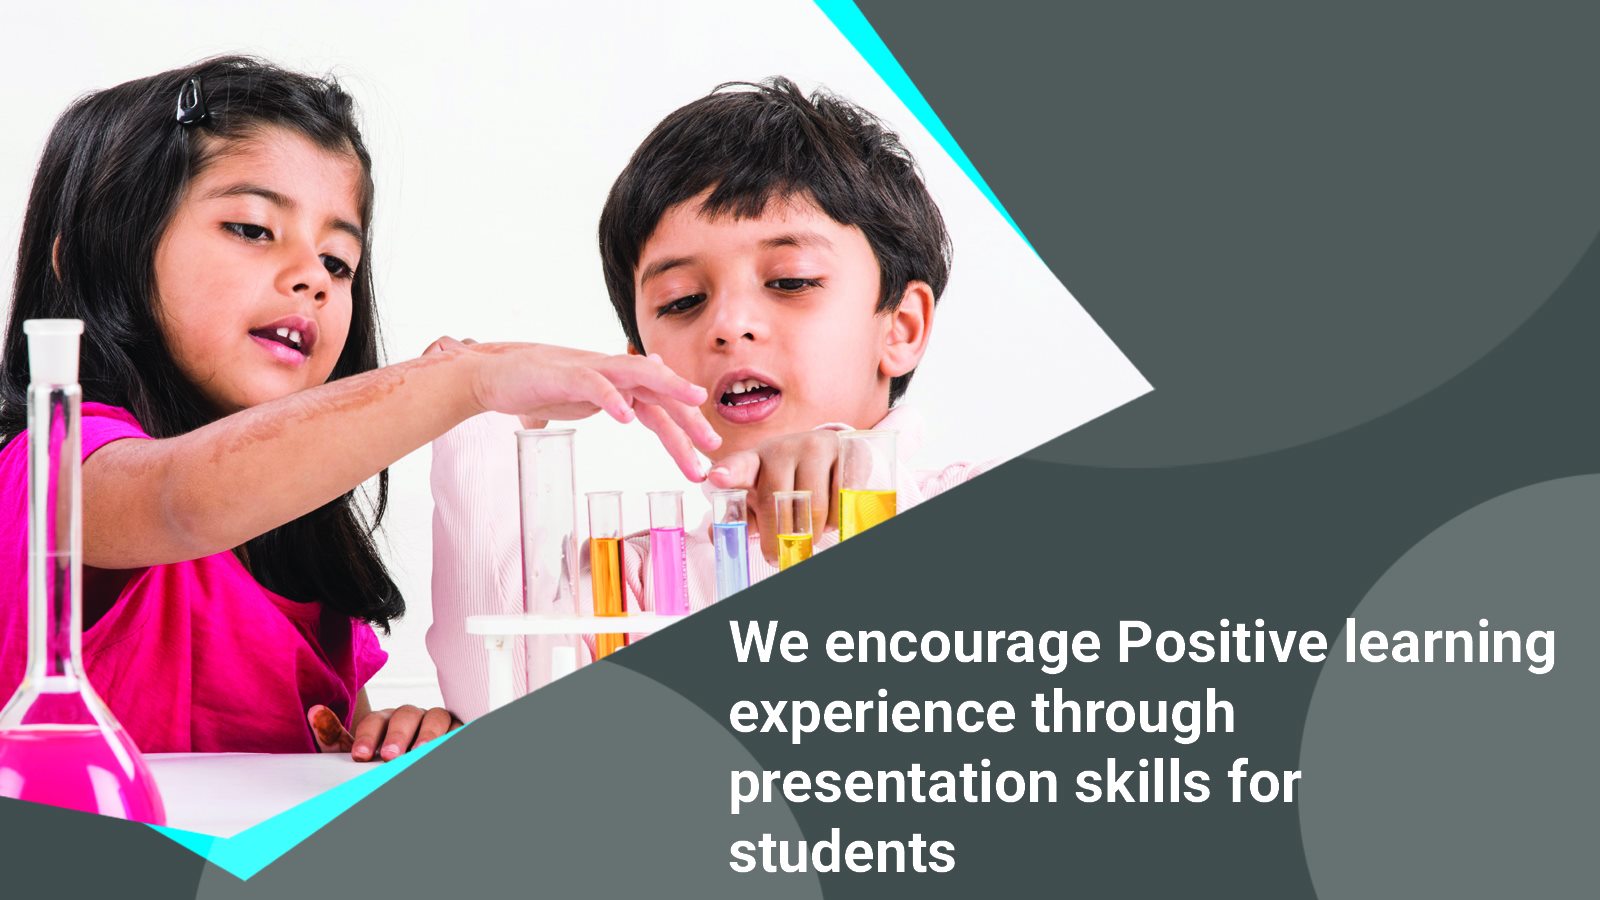 We encourage Positive learning experience through presentation skills for student